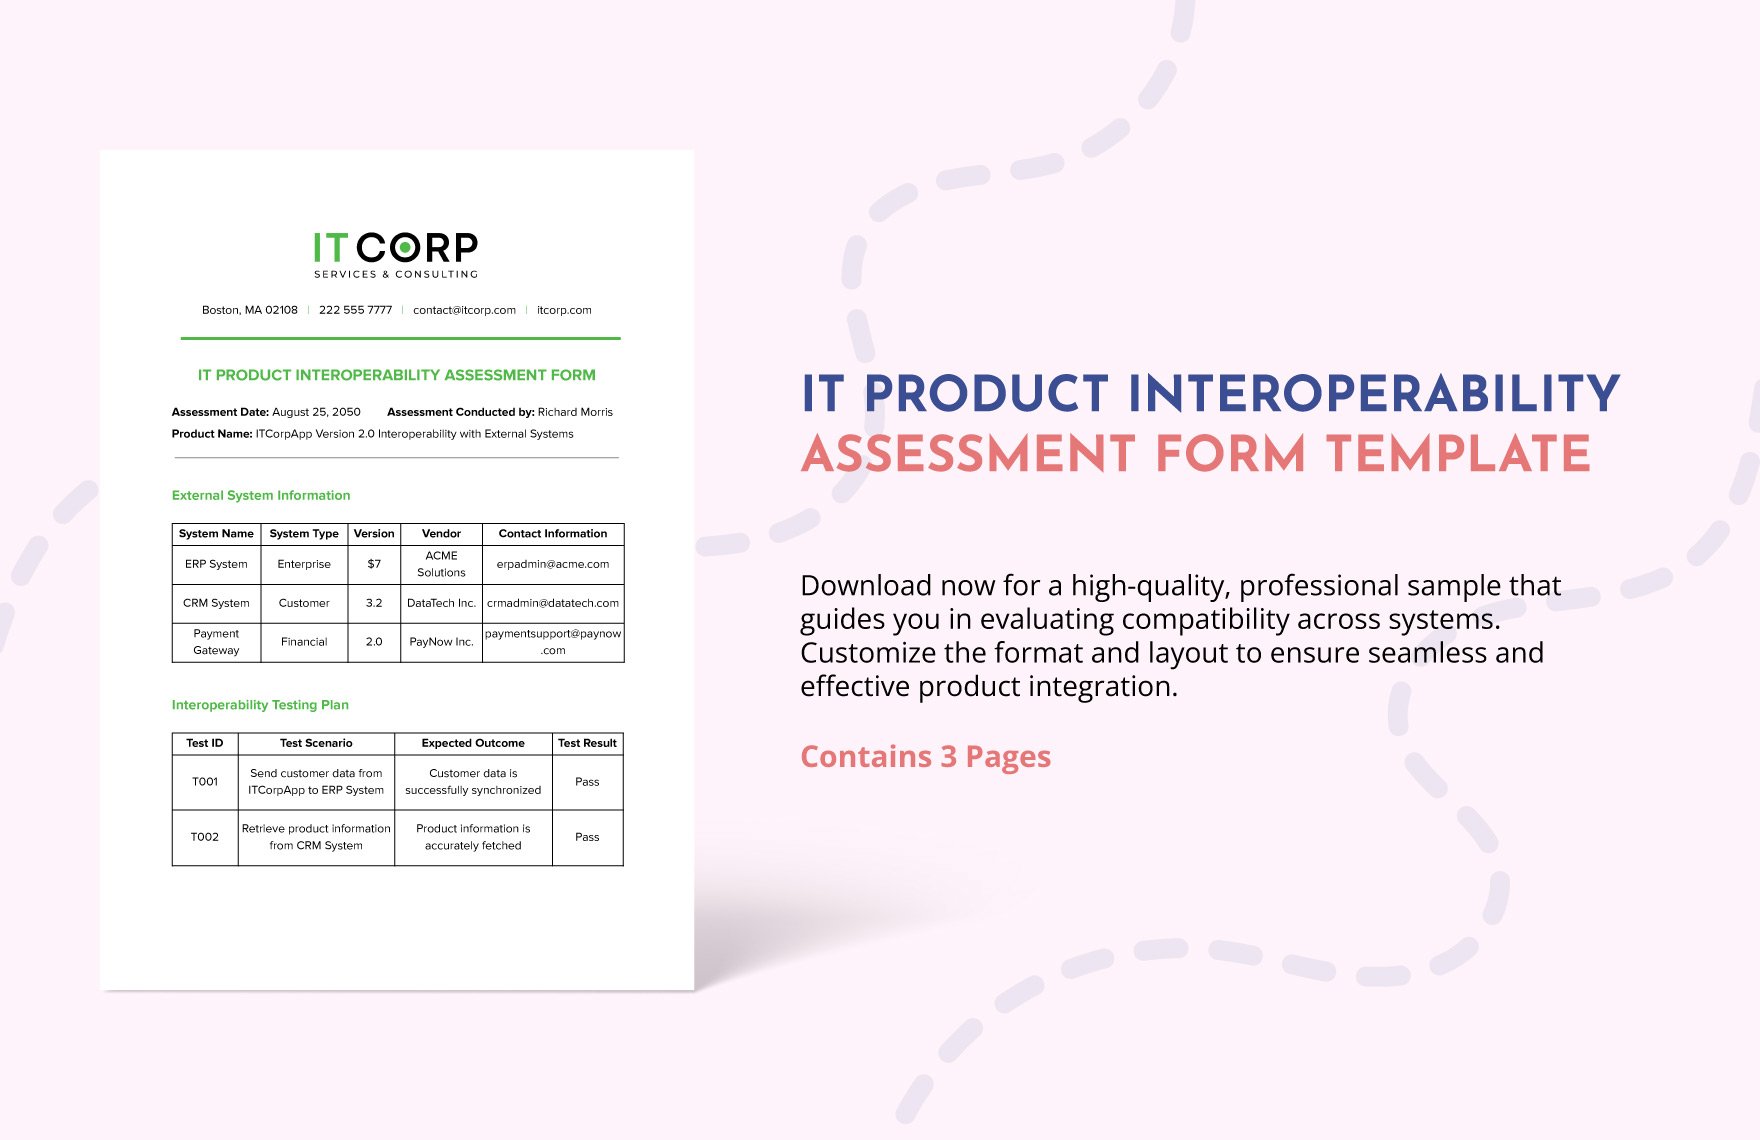 IT Product Interoperability Assessment Form Template